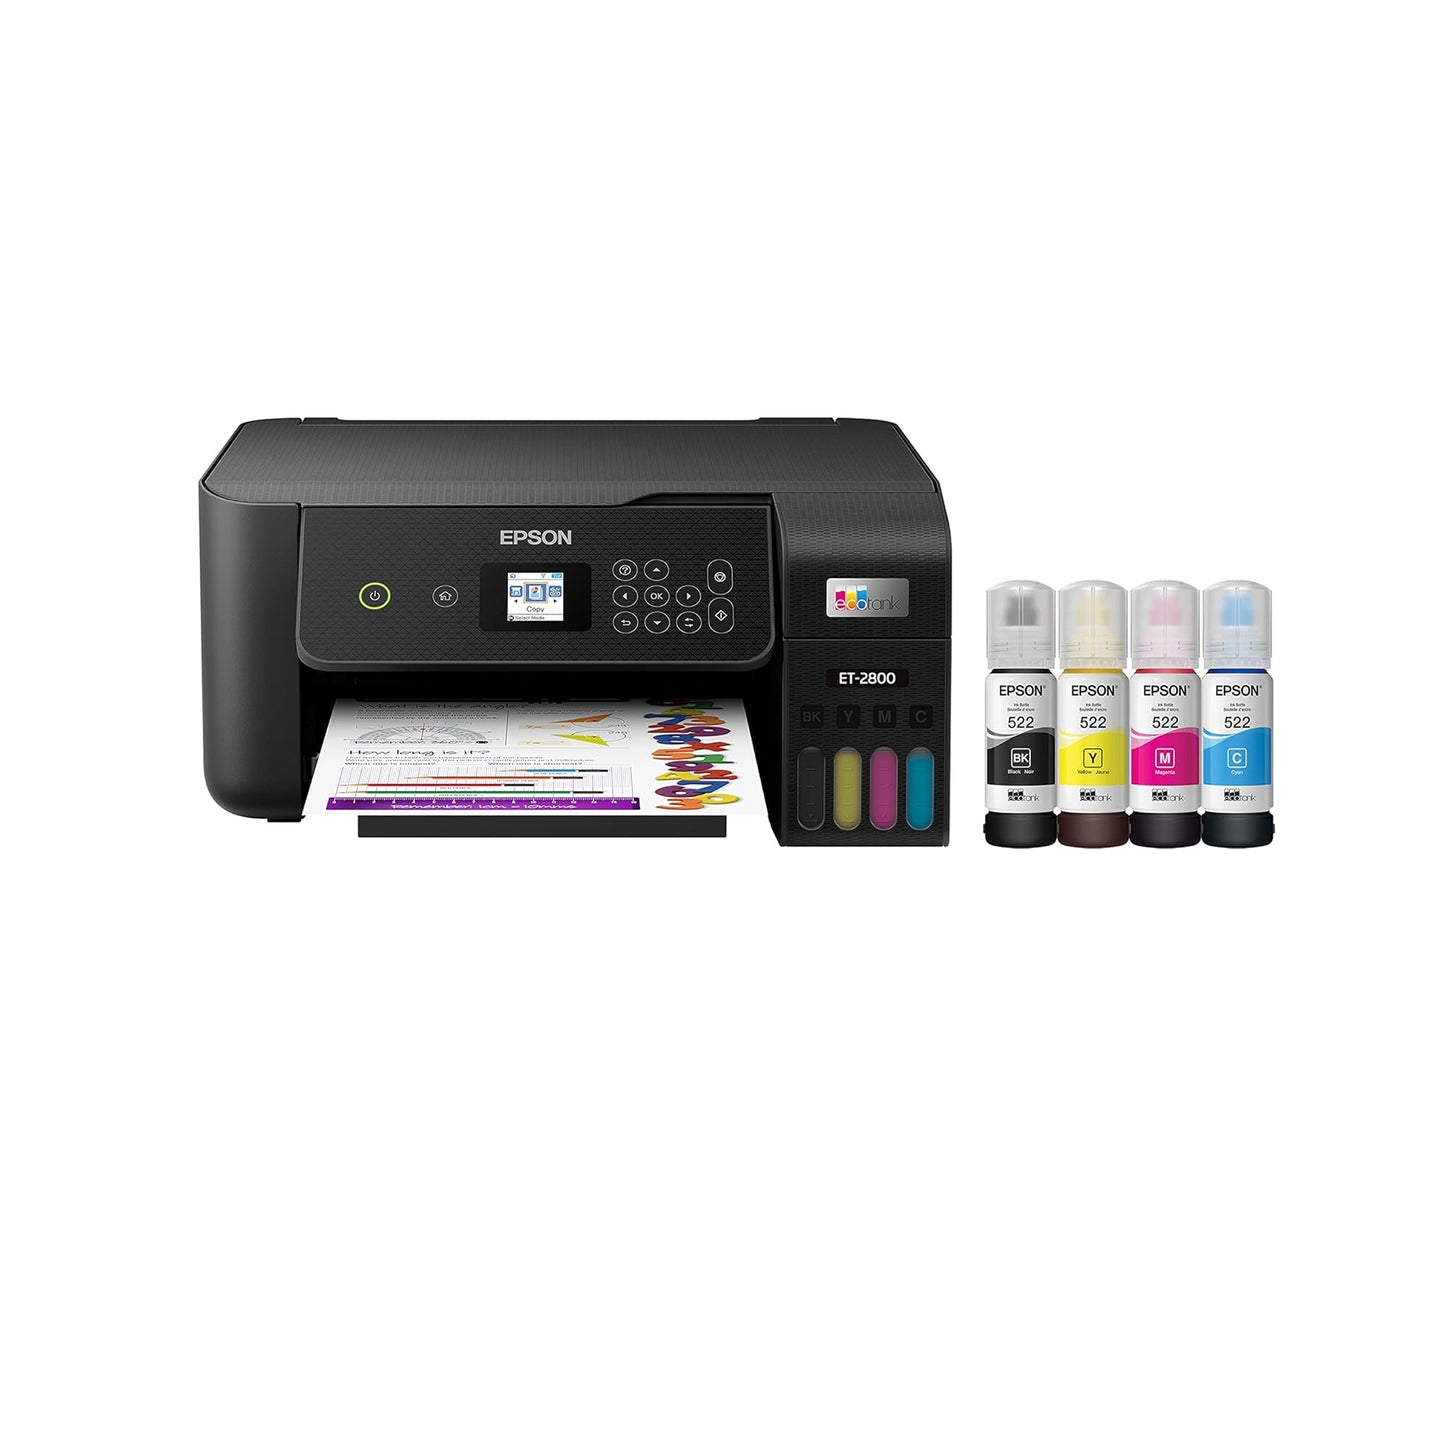 Epson EcoTank ET-2800 Wireless Color All-in-One Cartridge-Free Supertank Printer with Scan and Copy. Full 1-Year Limited Warranty - Black (Renewed Premium)